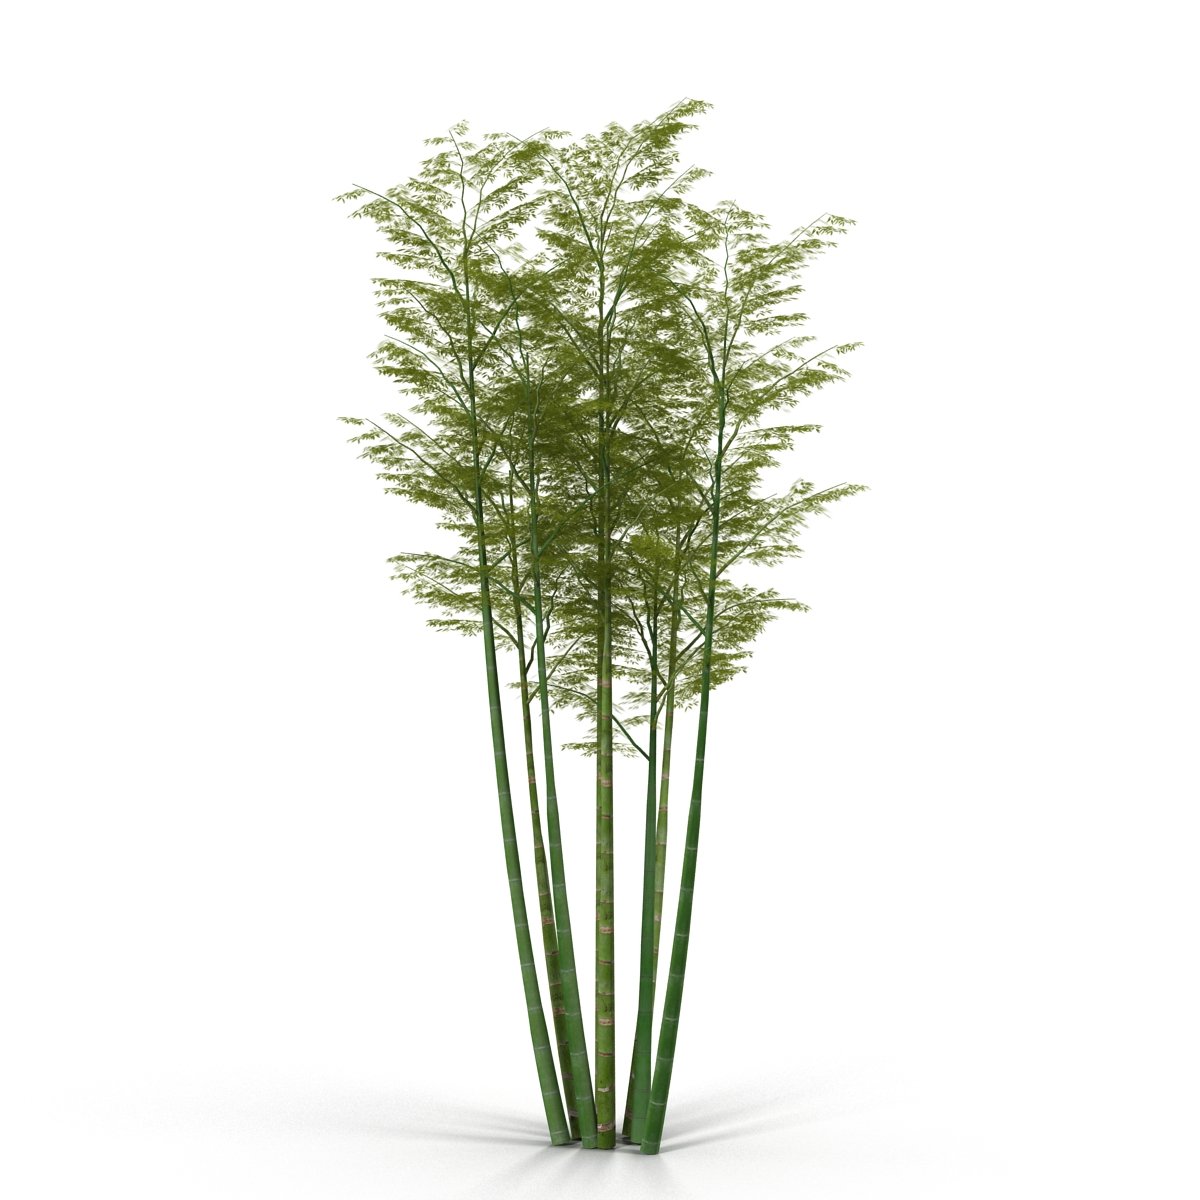 Tall bamboo tree with green leaves on a white background.